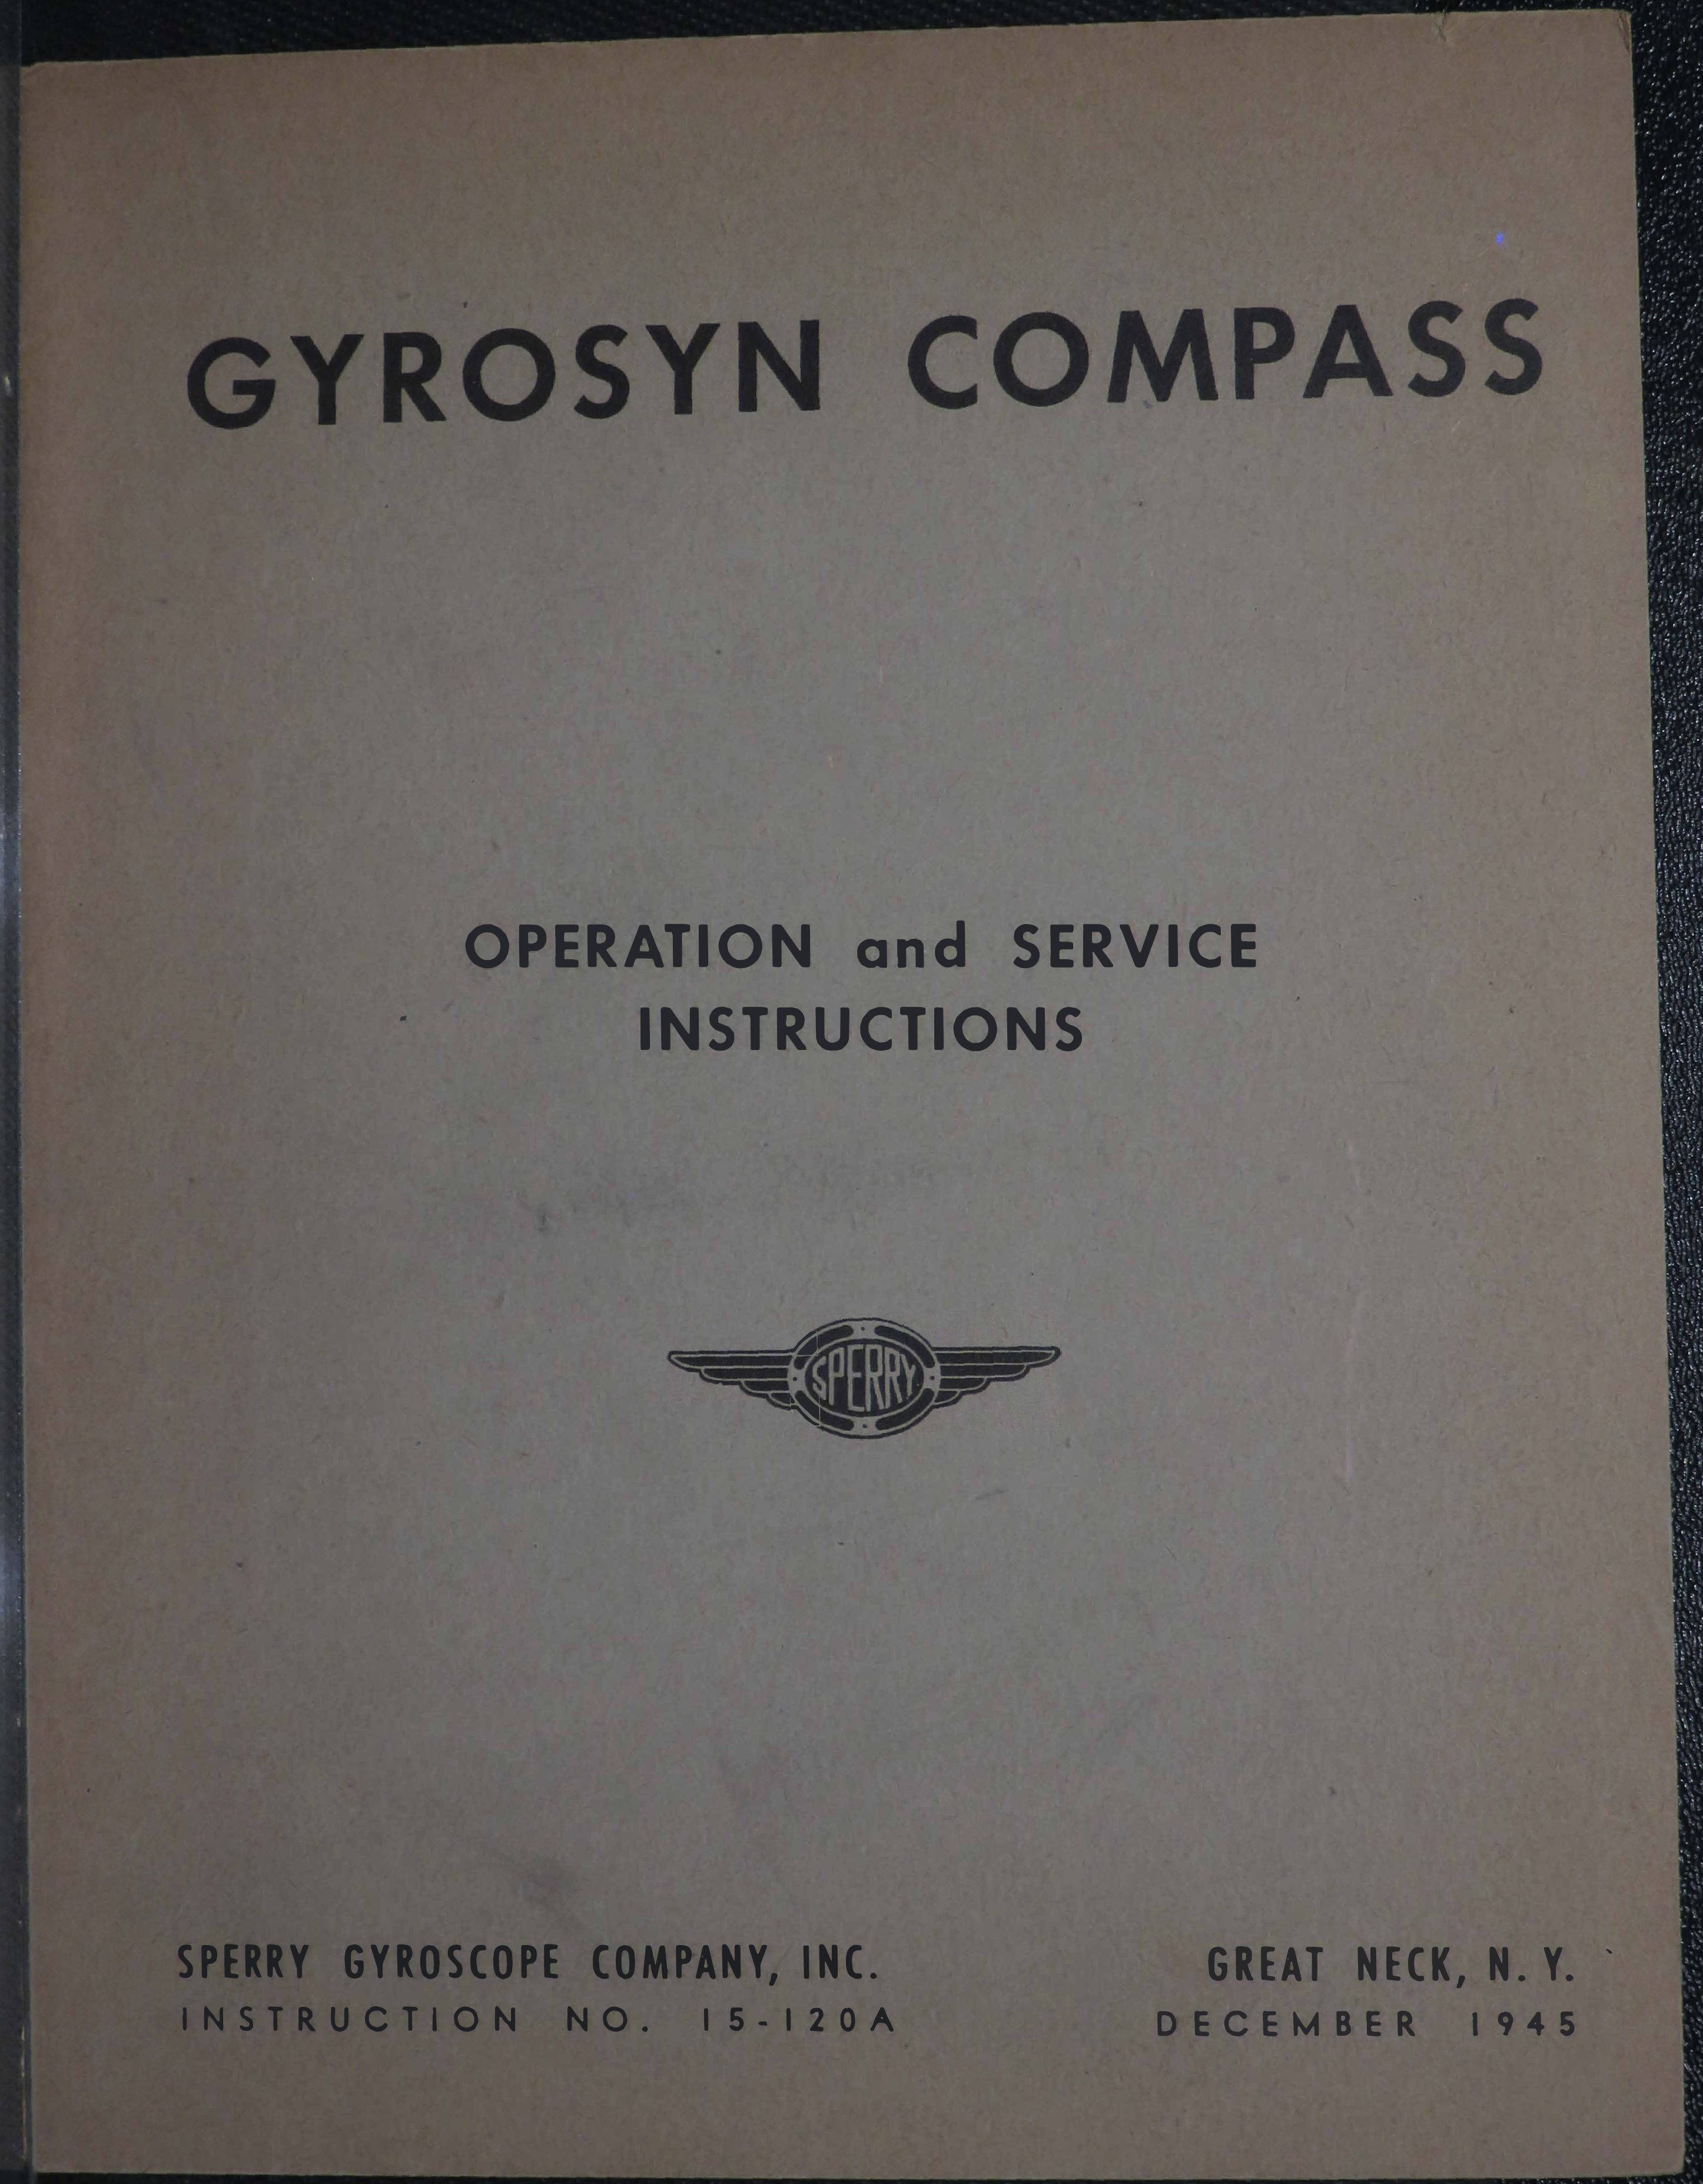 Sample page 1 from AirCorps Library document: Operation and Service Instructions for Gyrosyn Compass